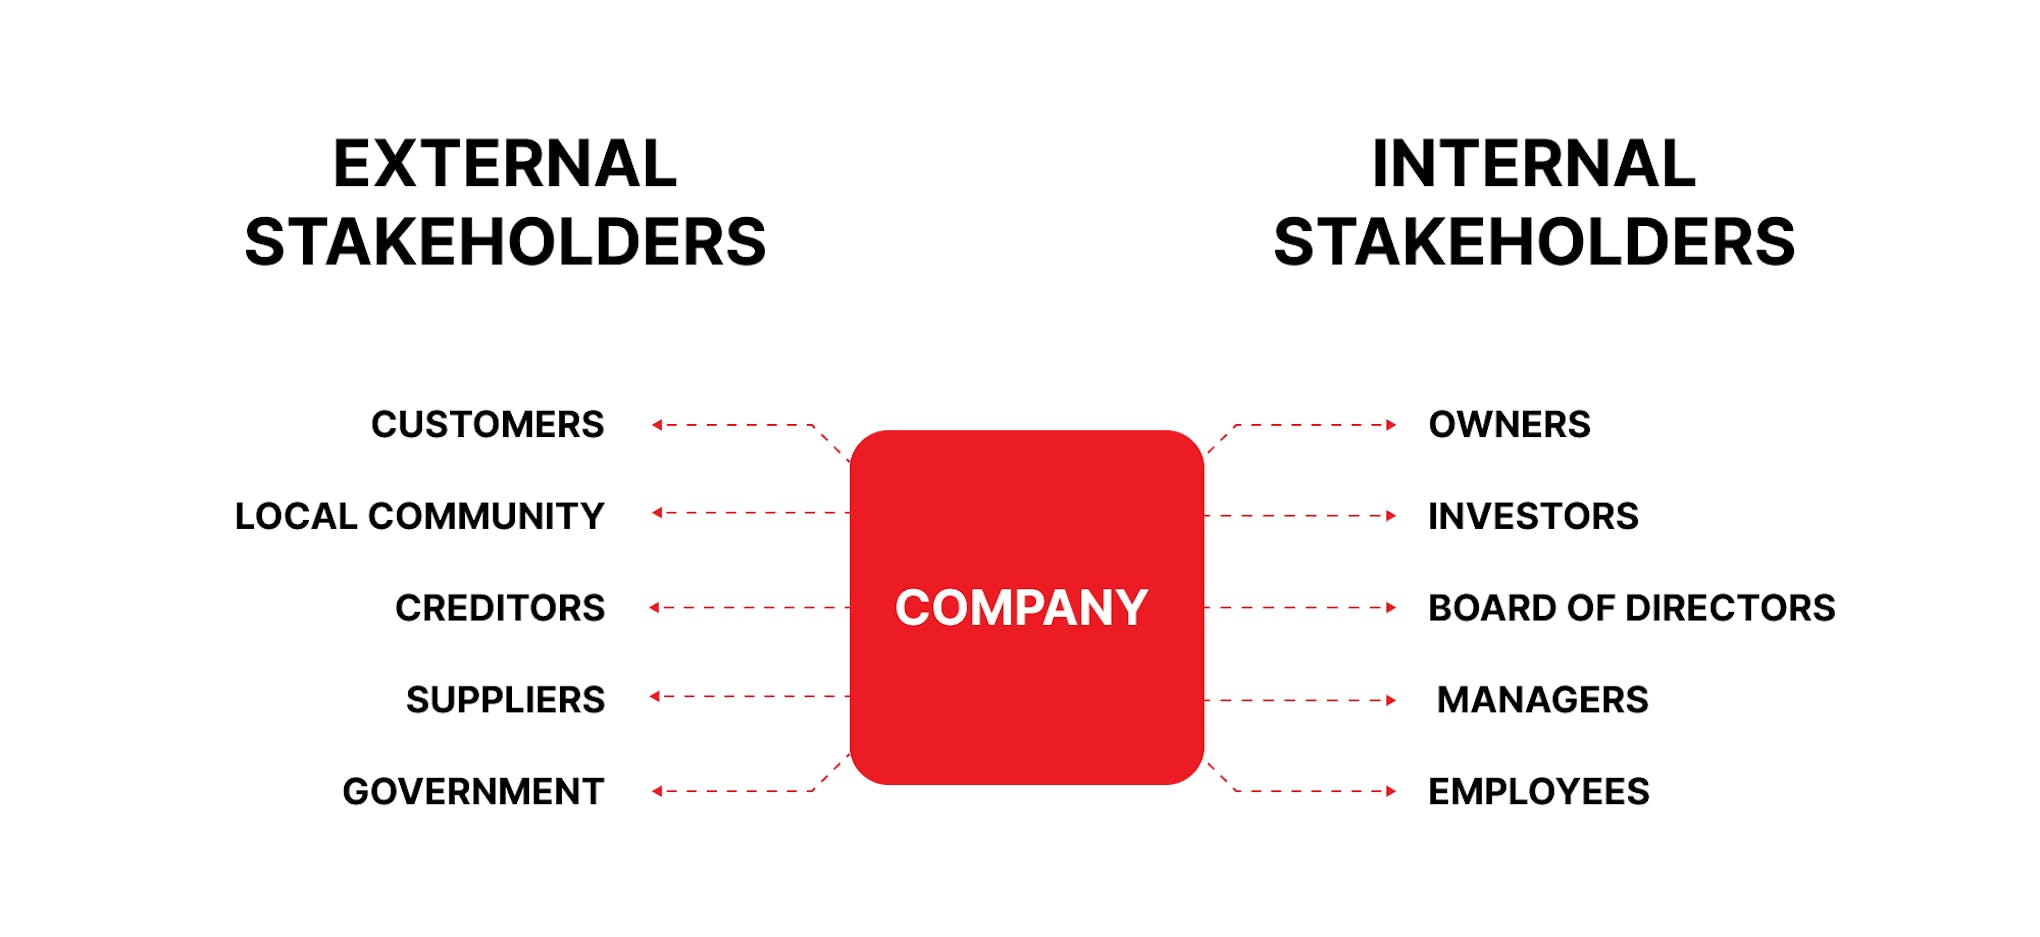 Who are the external and internal stakeholders